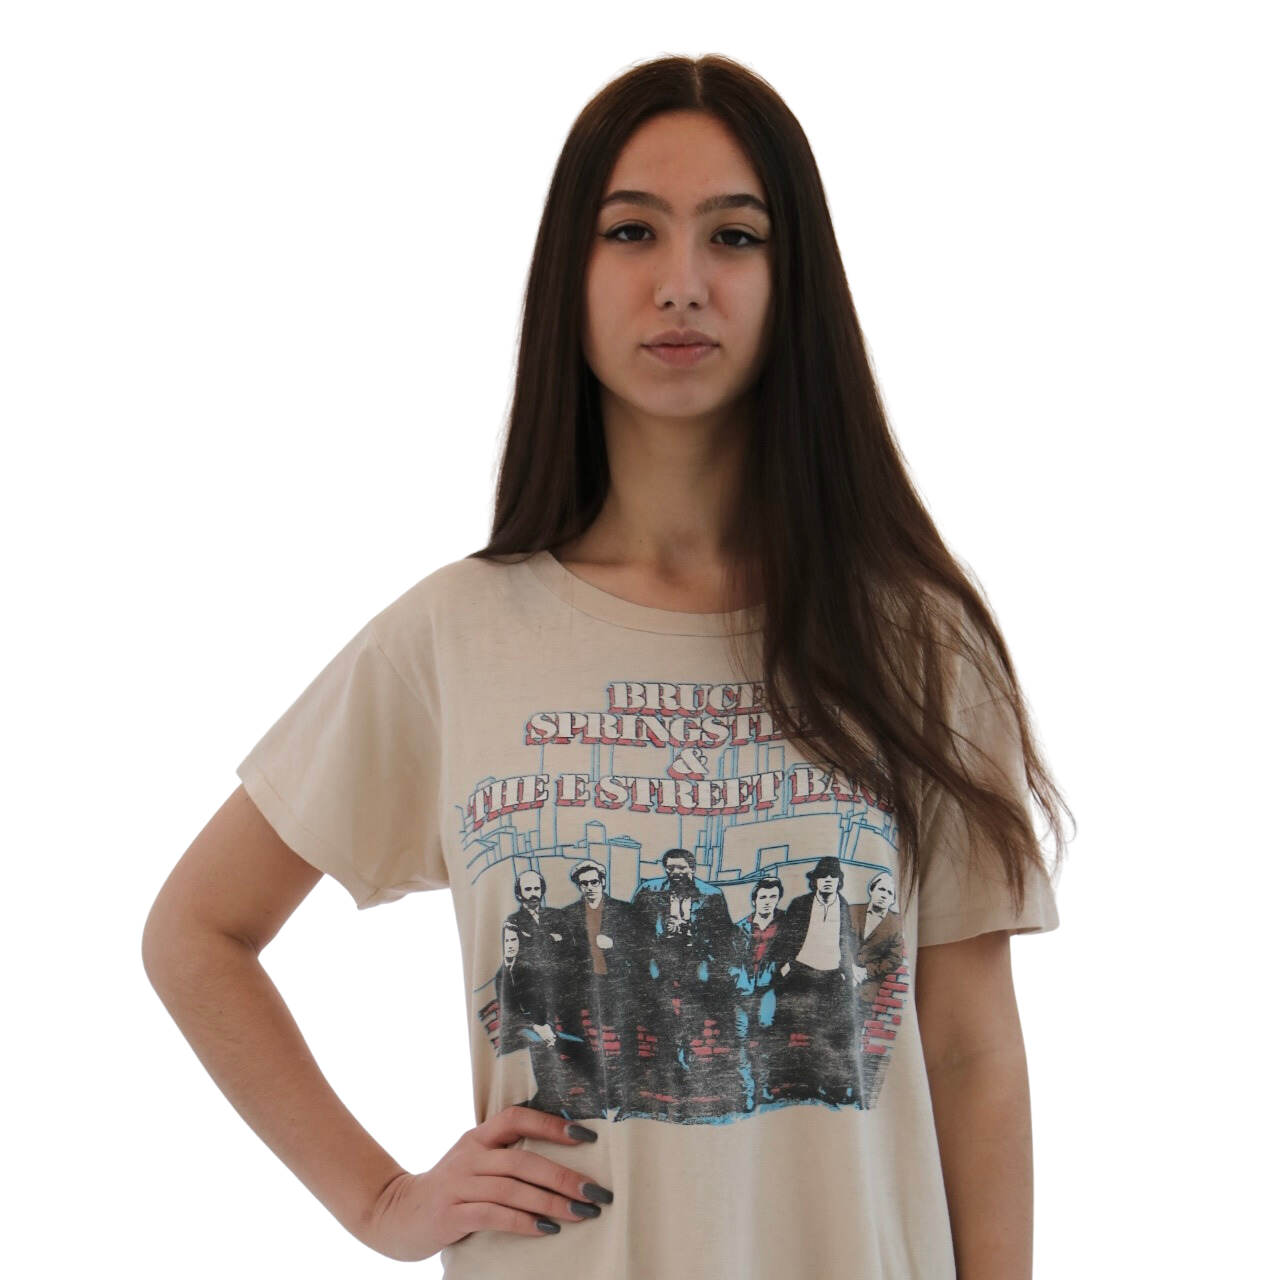 bruce springsteen & the E street band vintage t